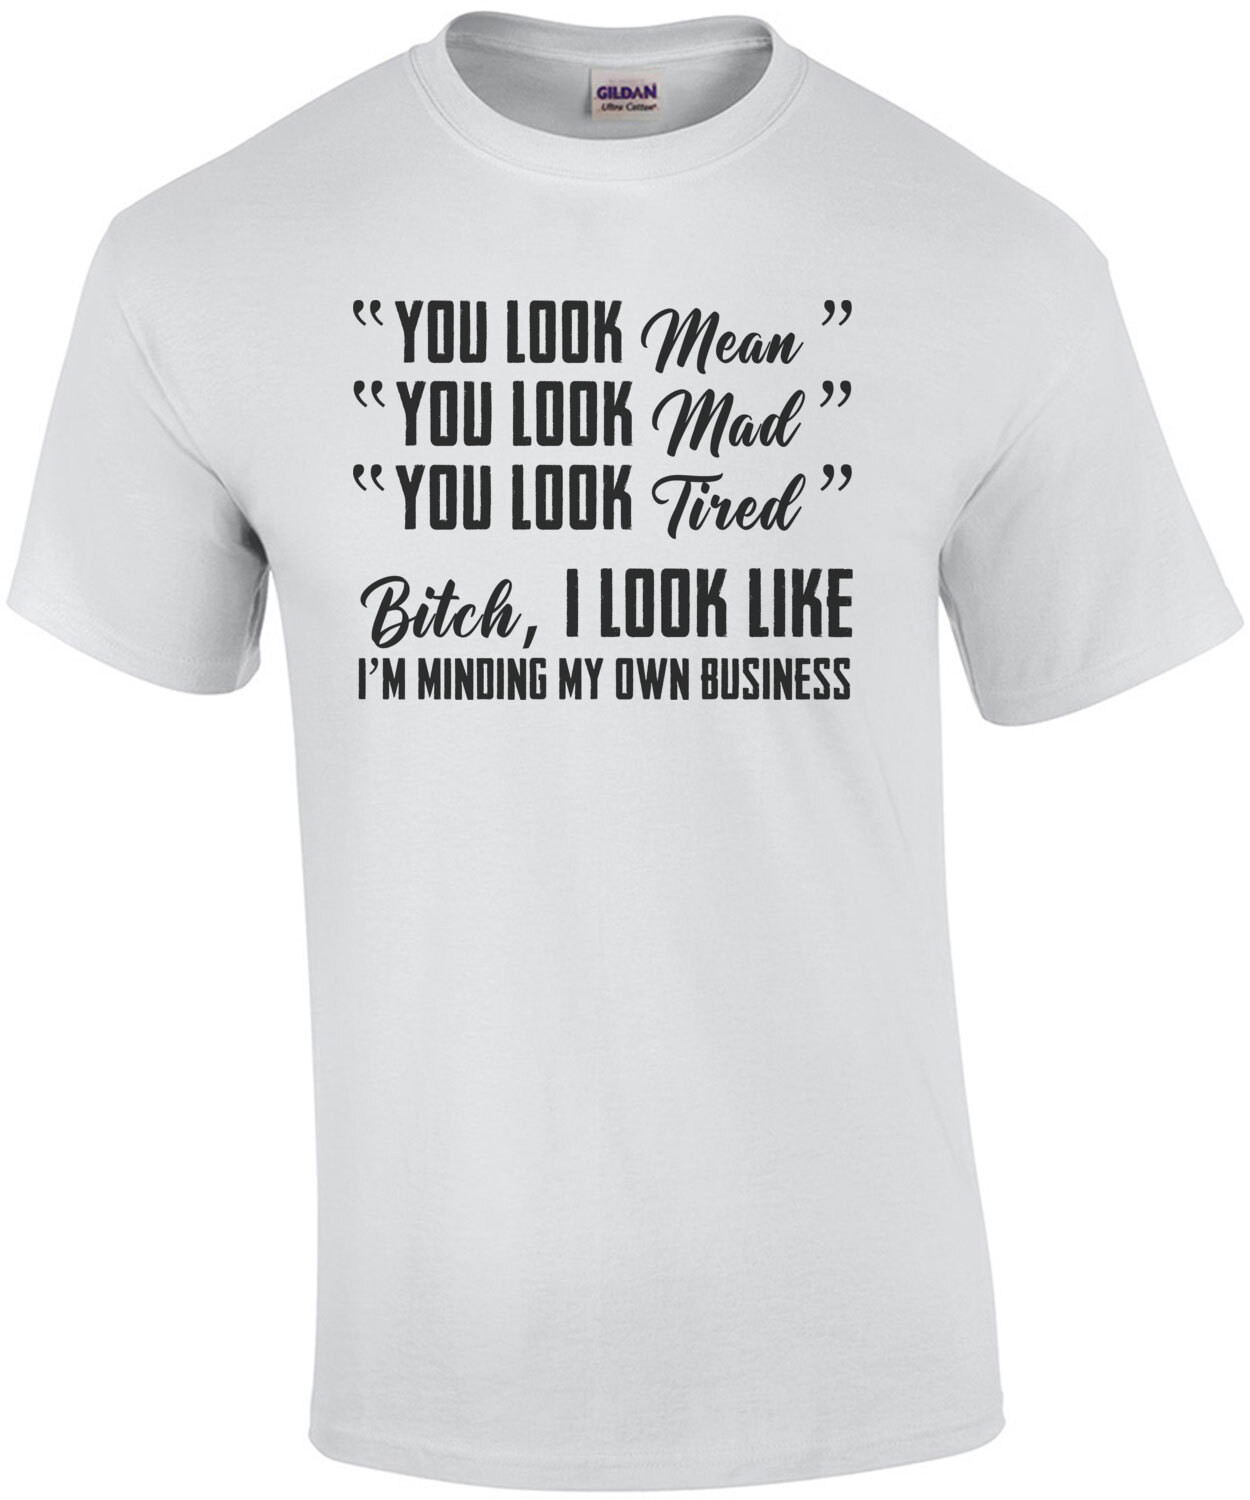 You look mean. You look mad. You look tired - ladies t-shirt